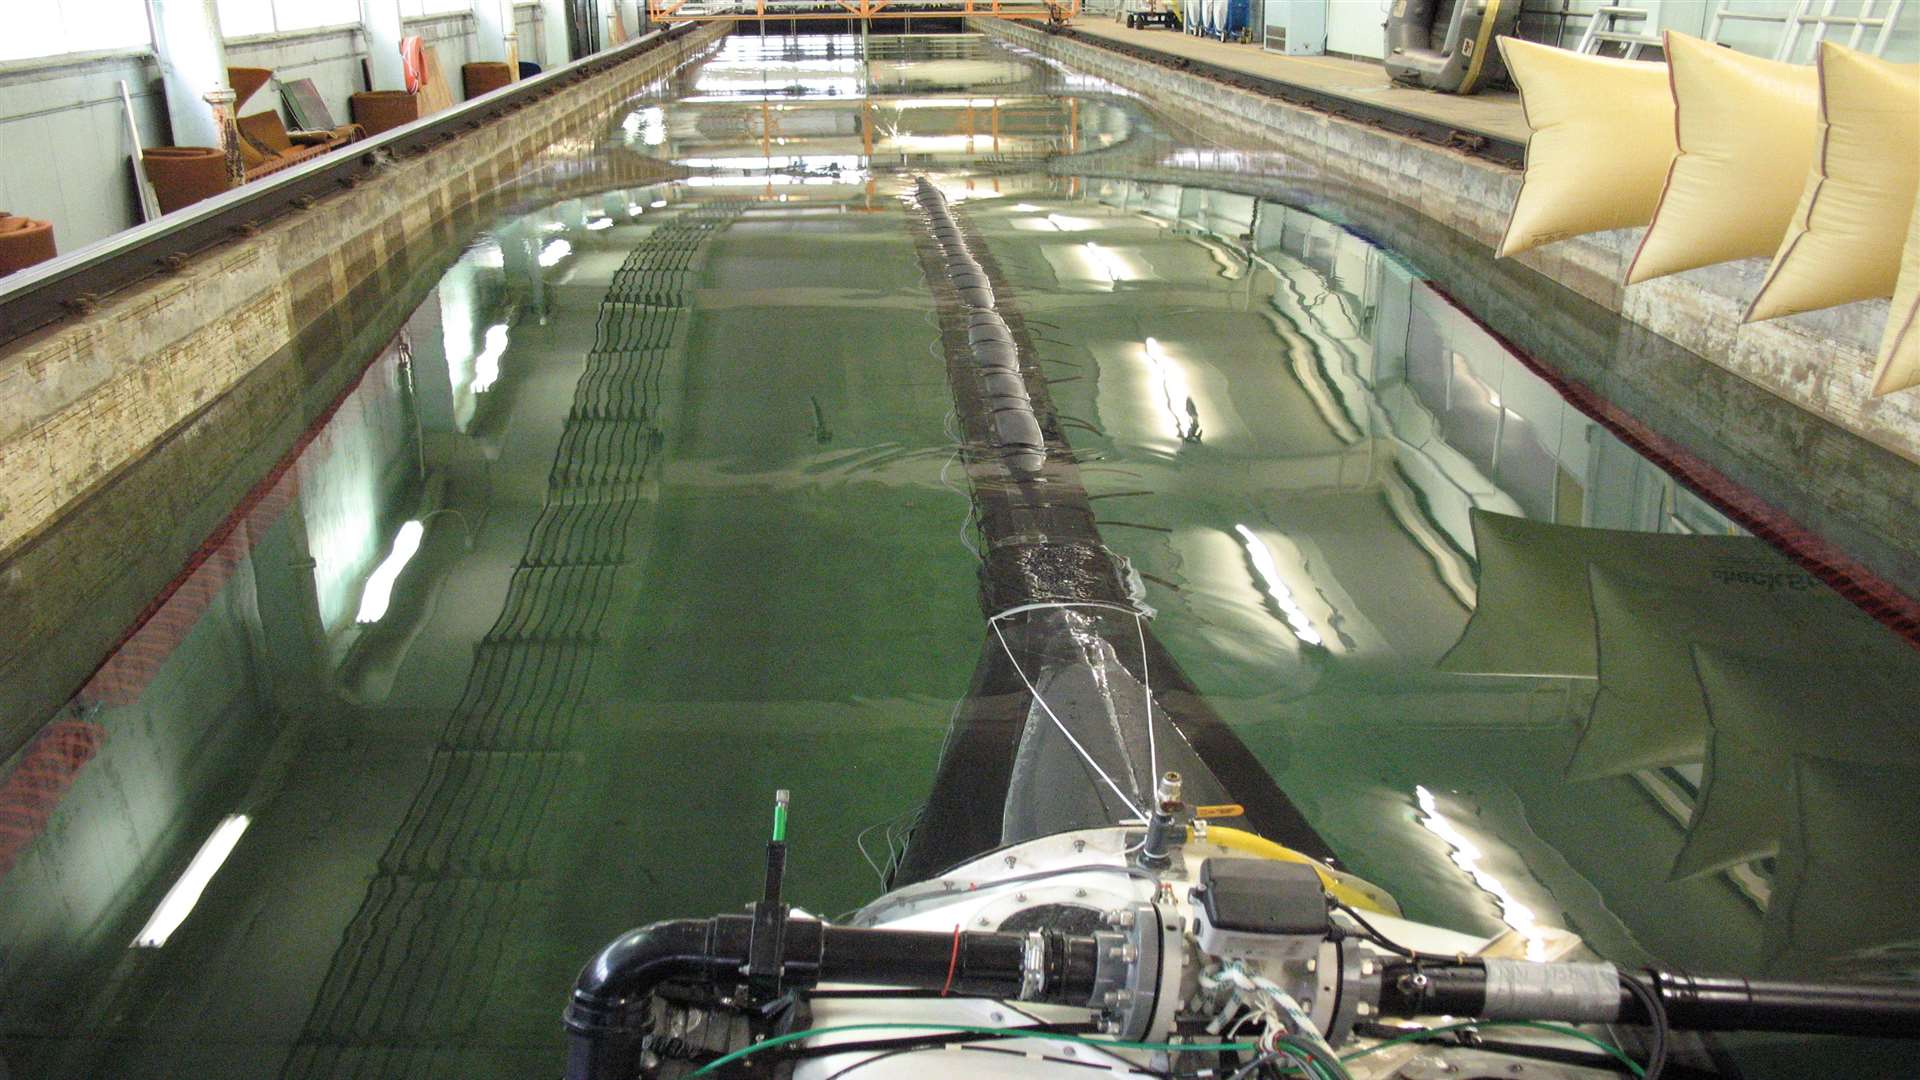 The Anaconda wave energy converter being tested in Strathclyde